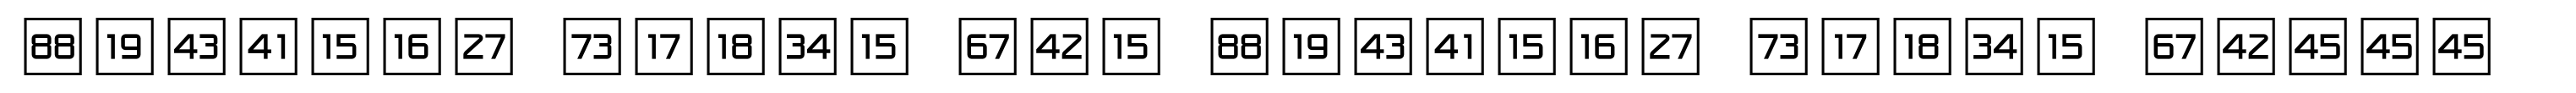 Numbers Style One Numbers Style One Square Positive